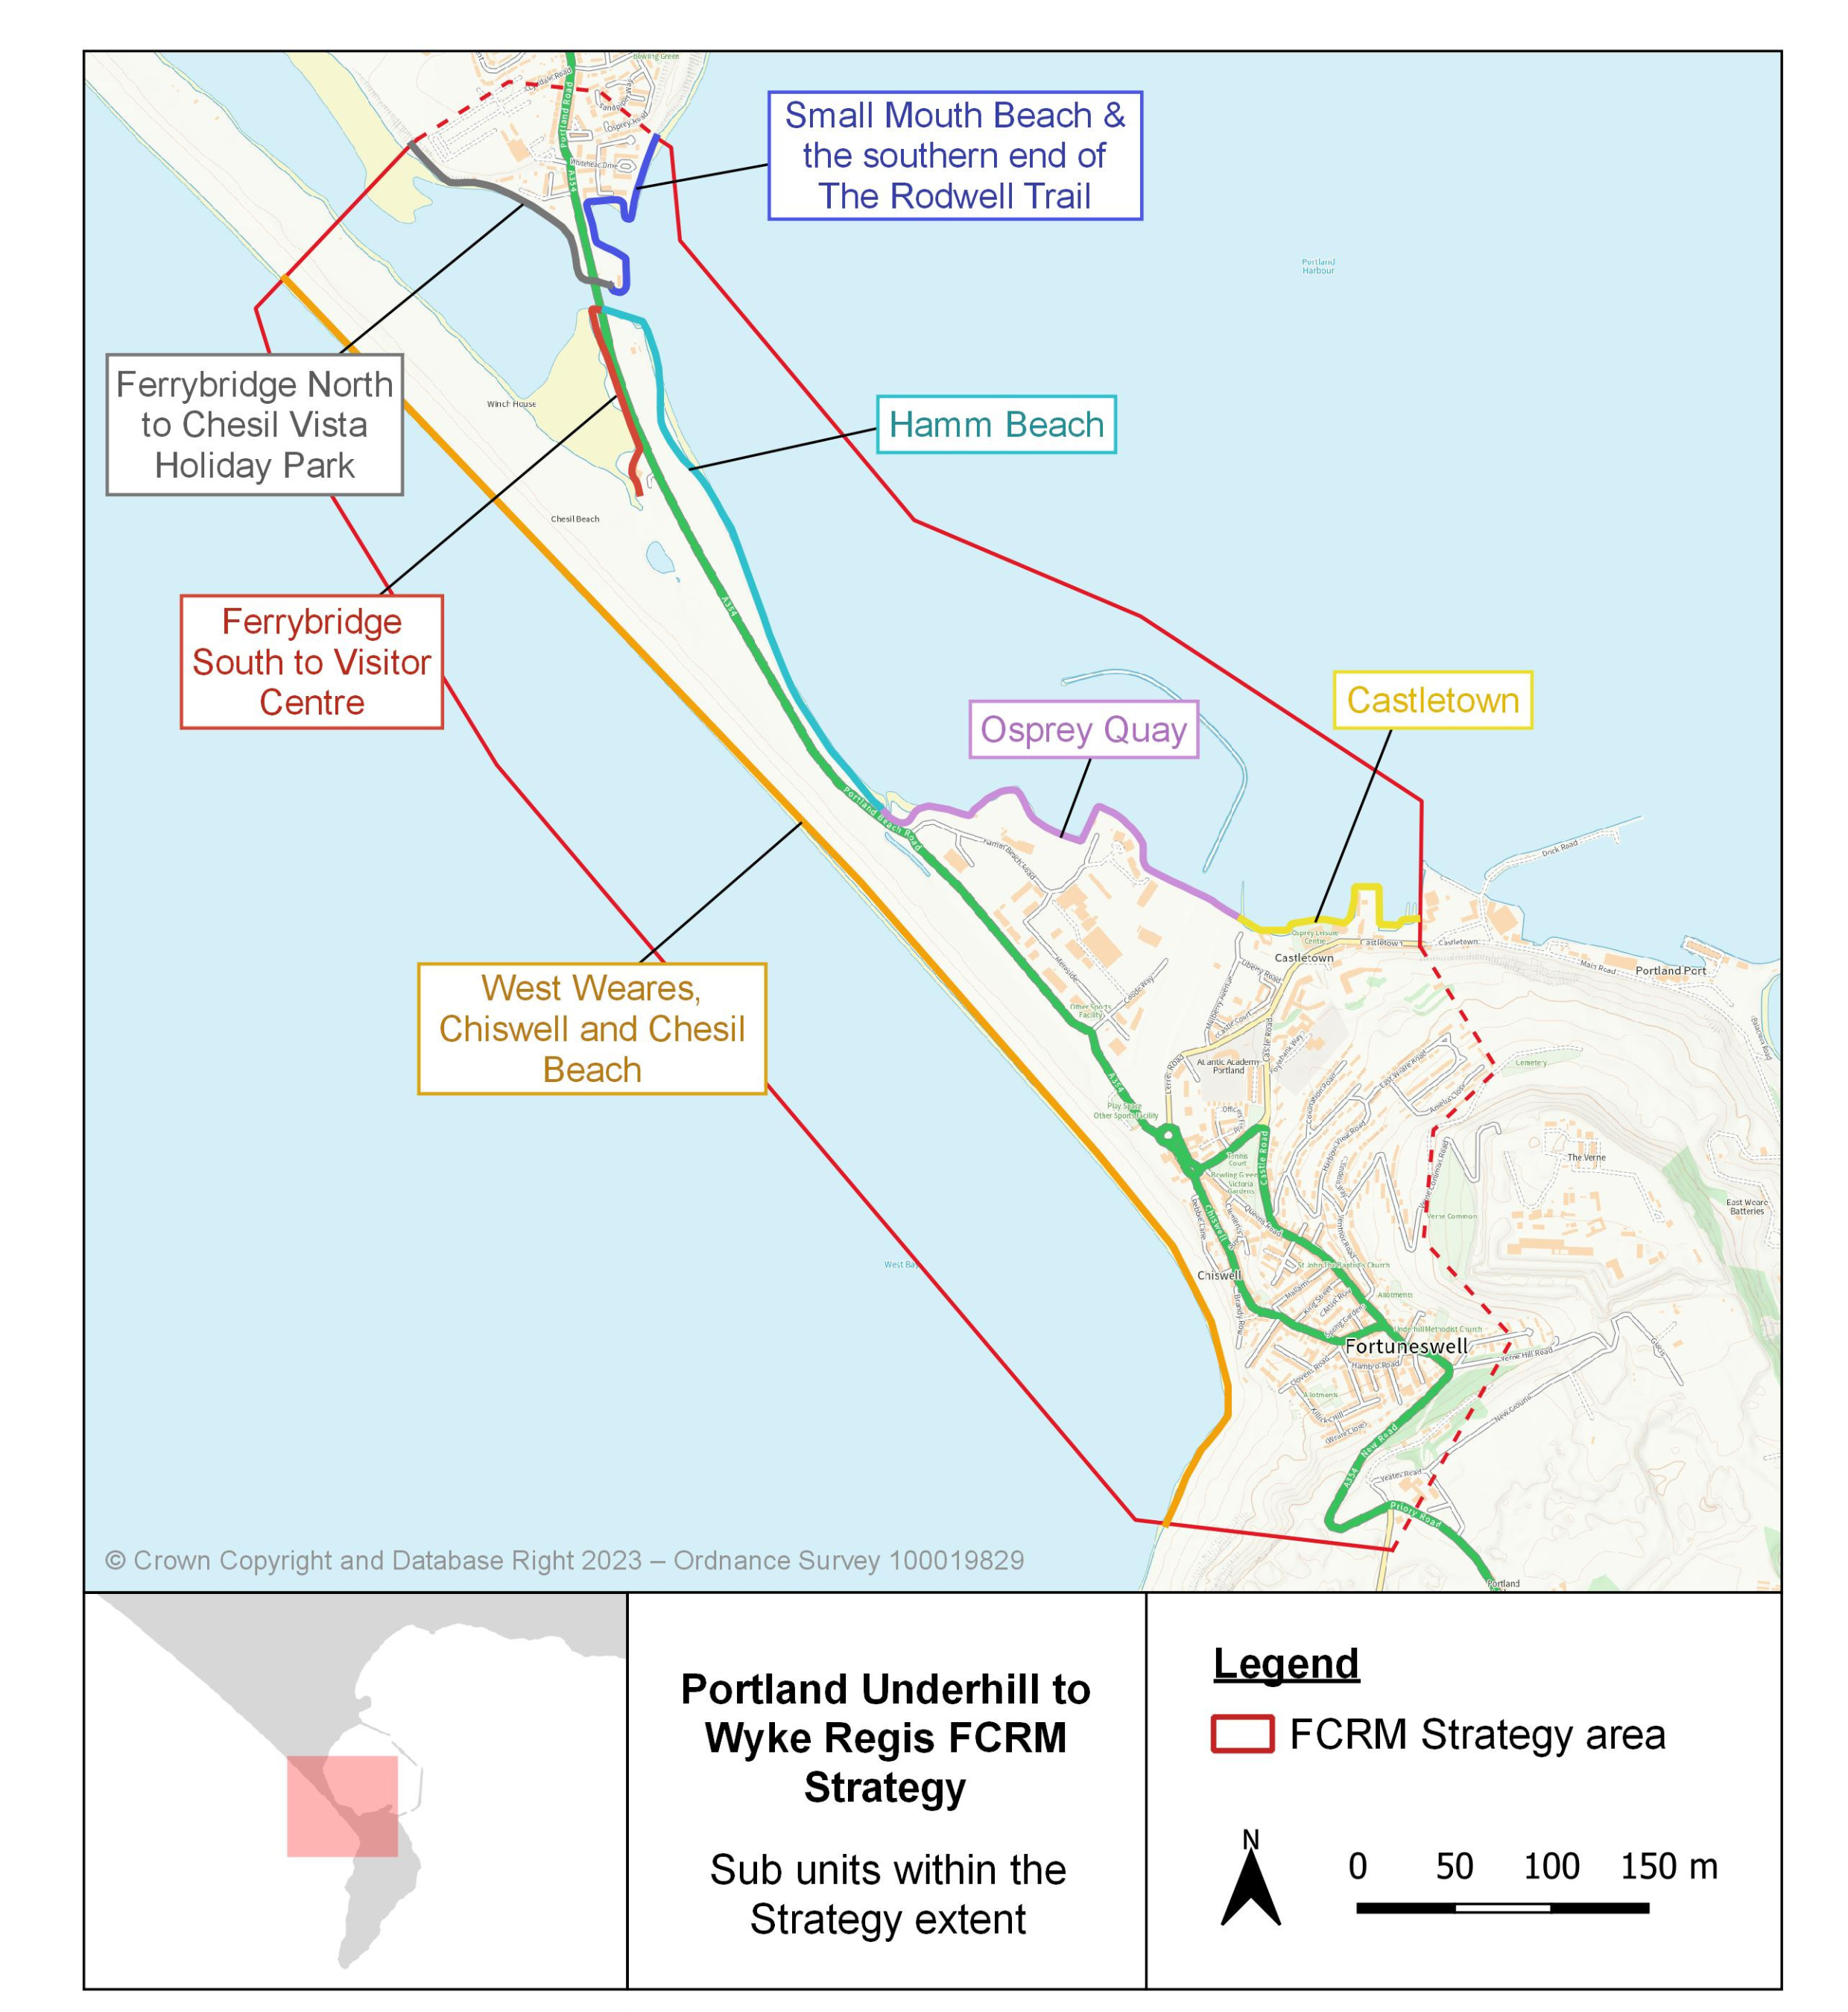 Figure 2: Portland Underhill to Wyke Regis FCRM Strategy project extent and key locations